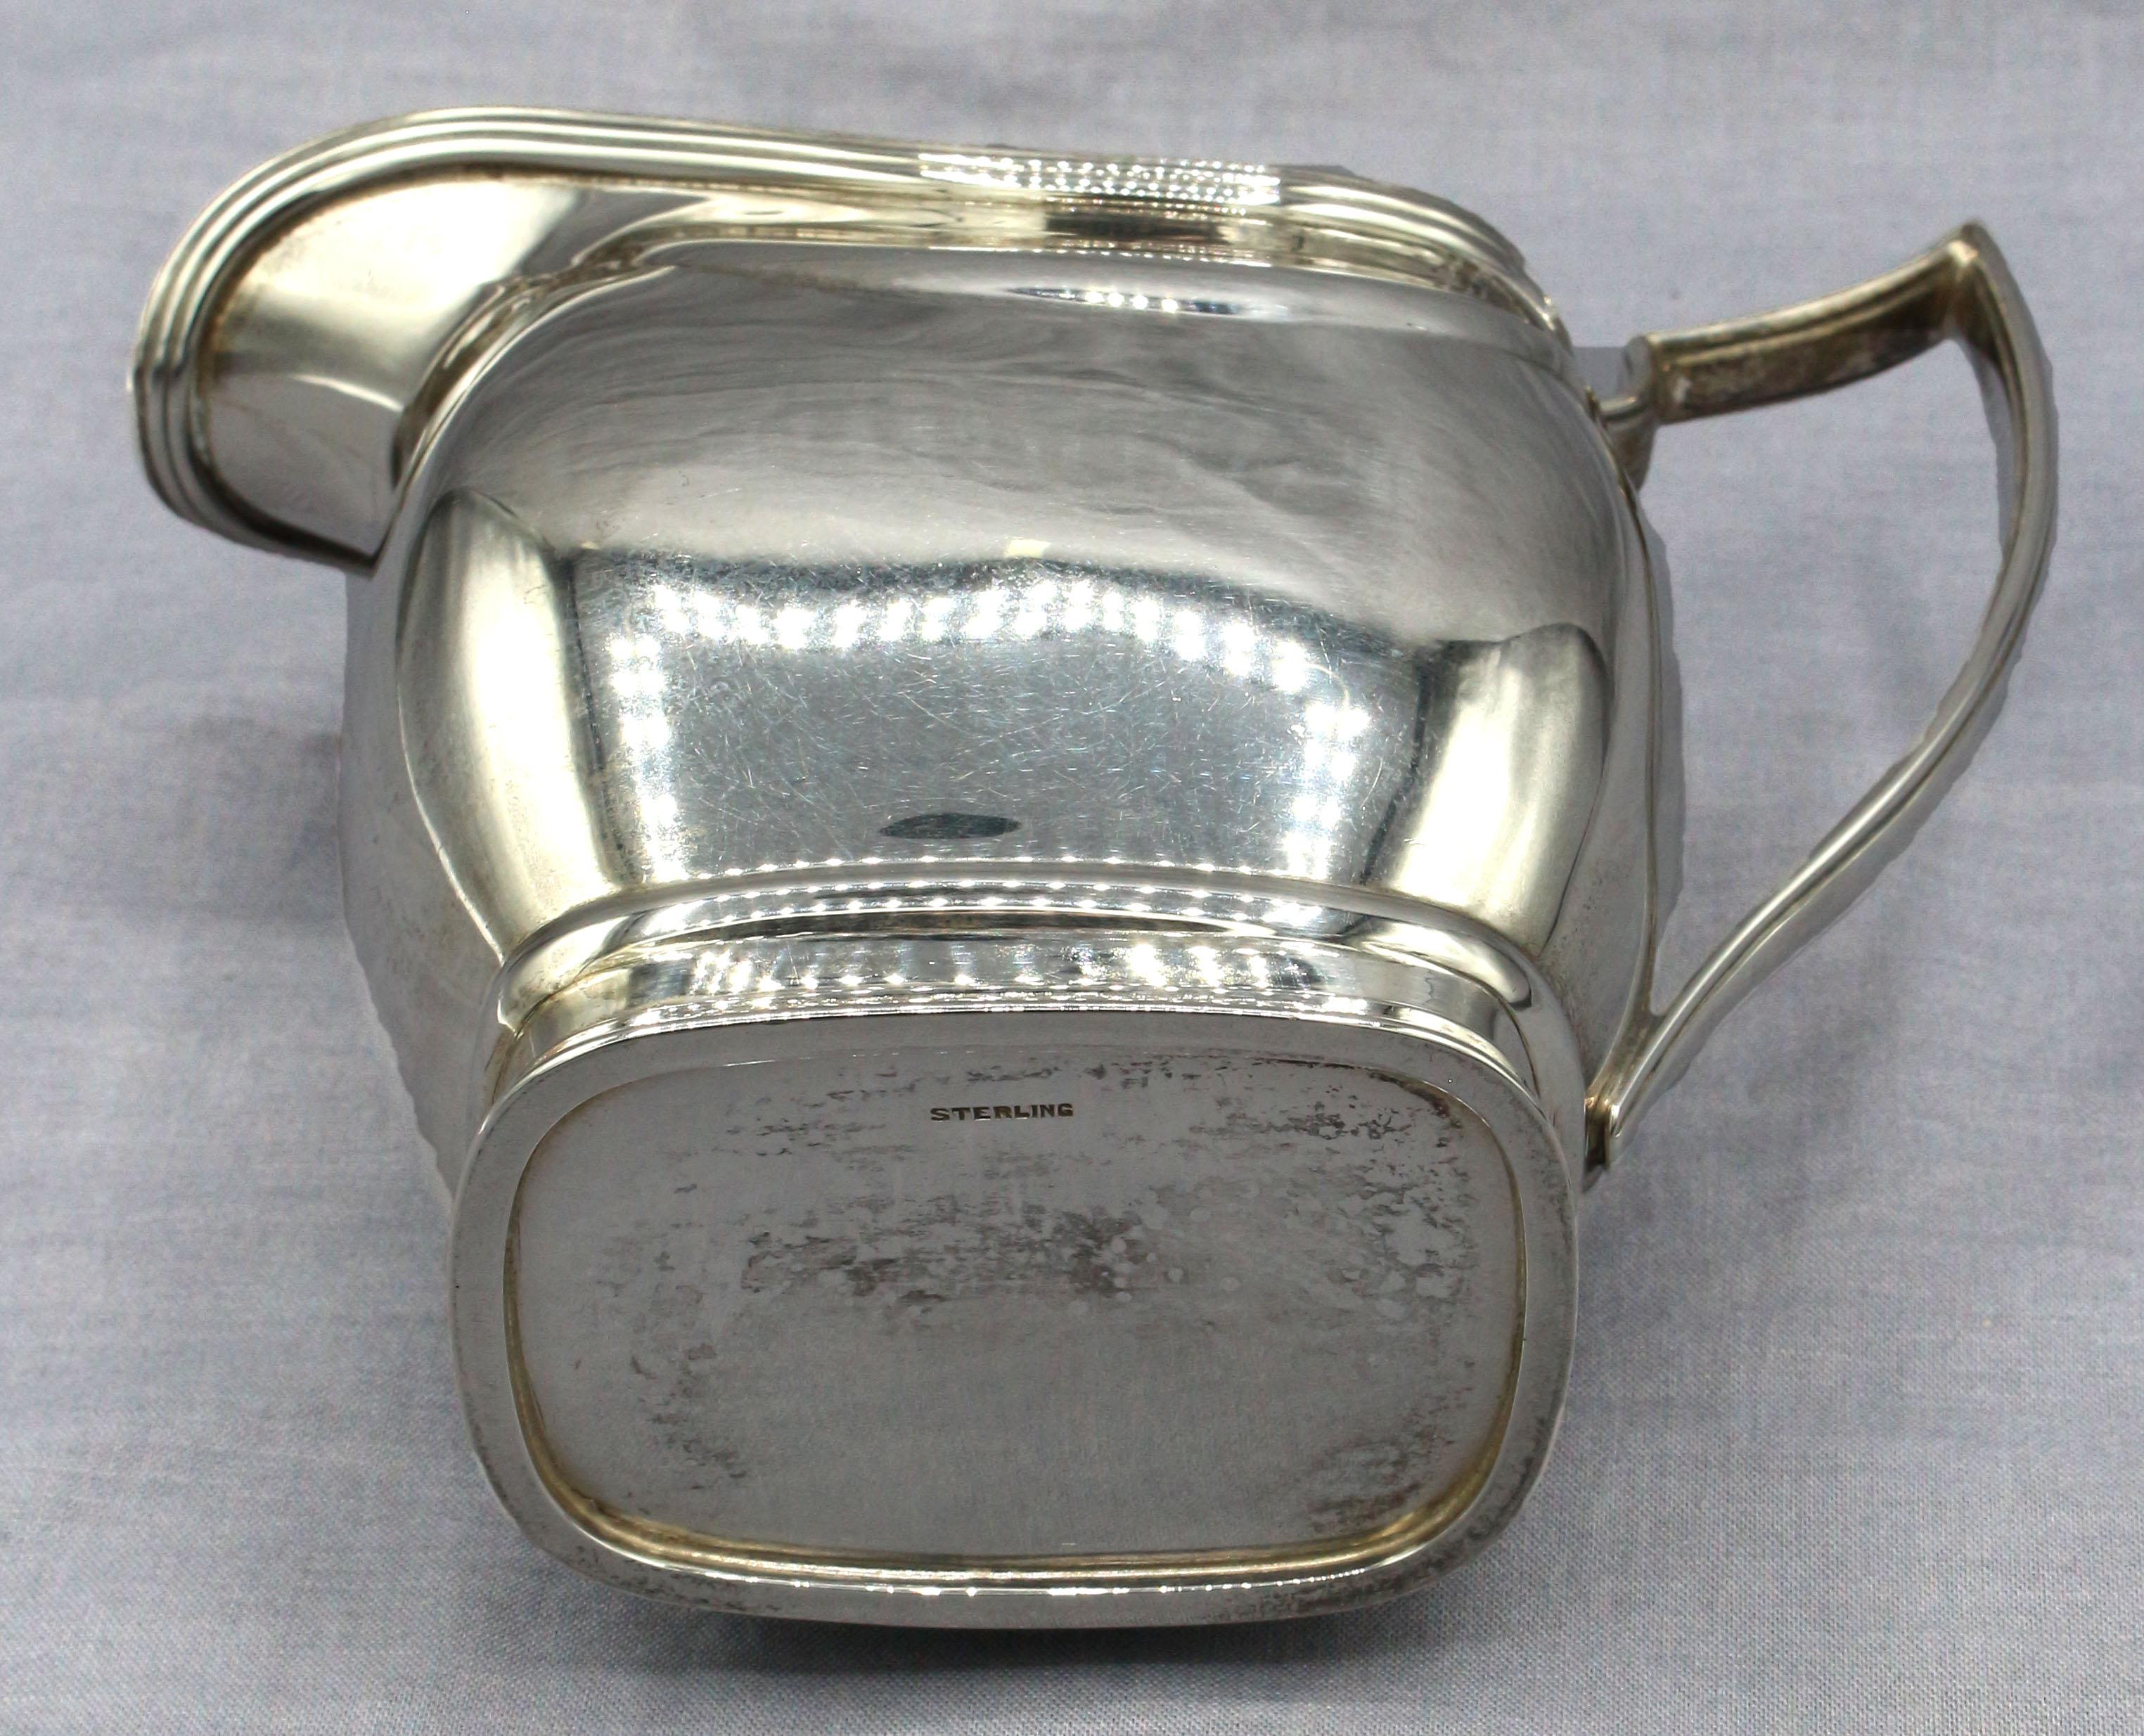 Sterling Silver 3-Piece Tea Set by Towle, circa 1900-30 For Sale 5